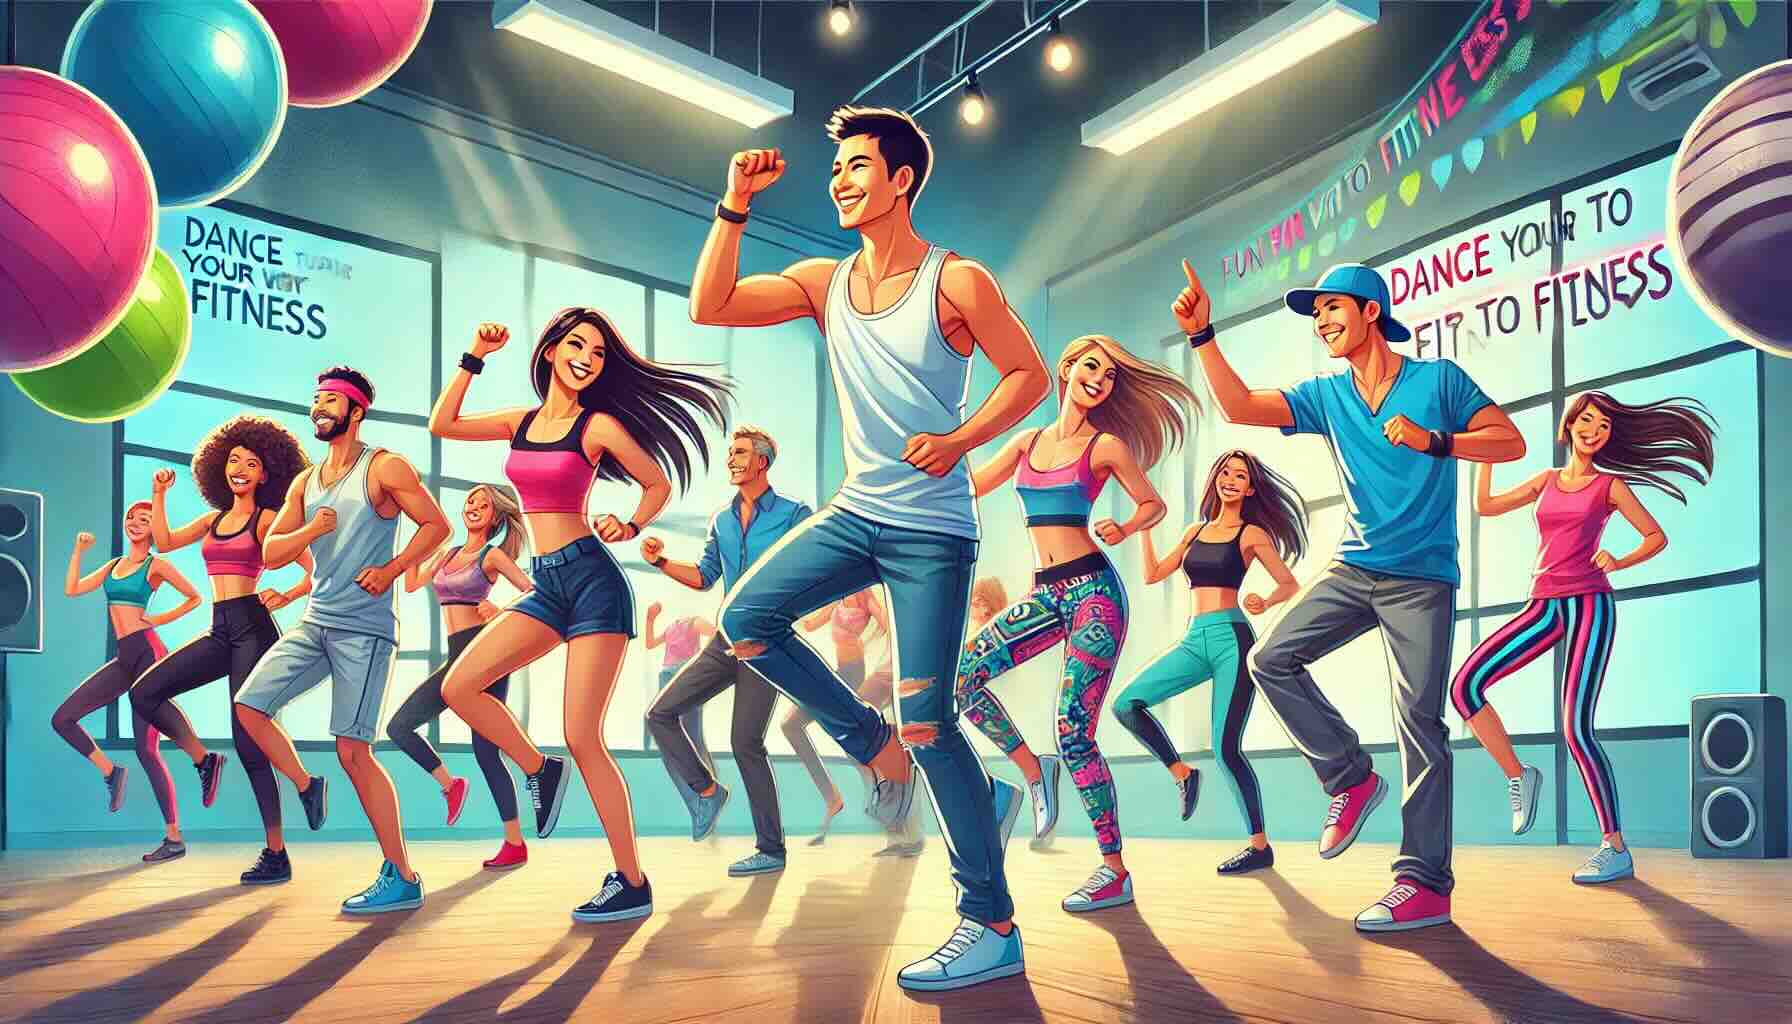 Dance Your Way to Fitness: Fun Workouts You’ll Love